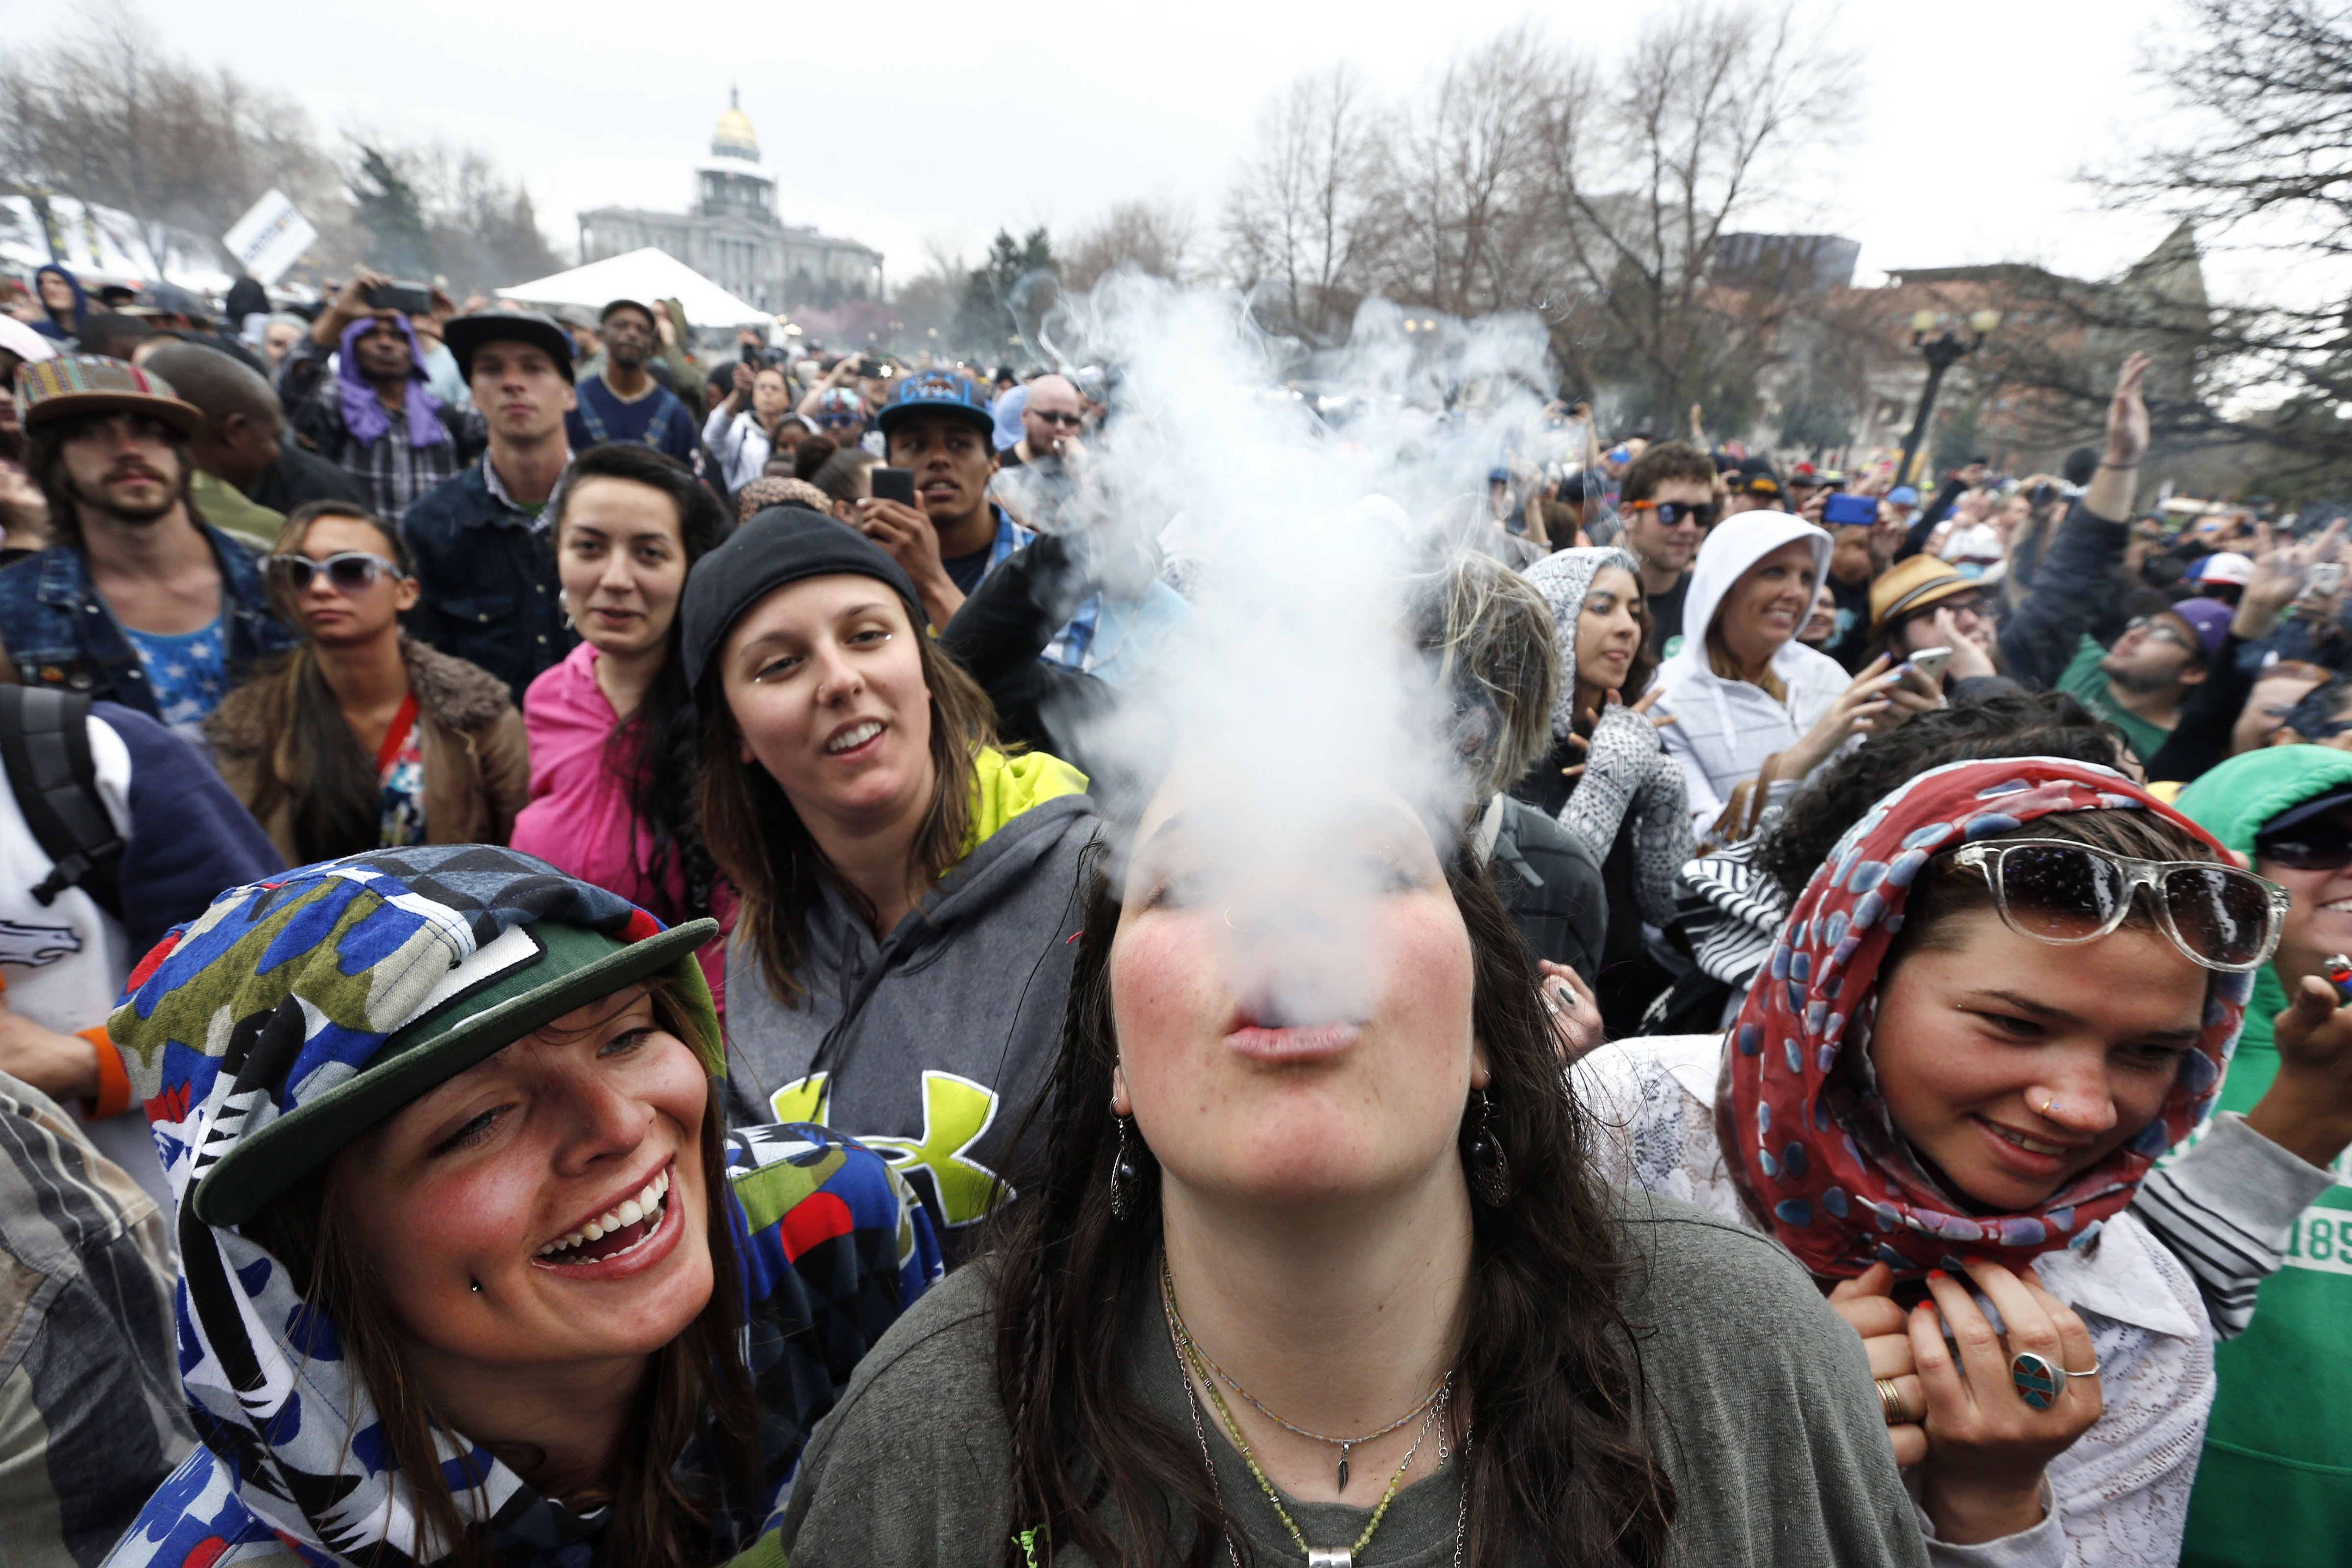 With the Colorado state capitol building visible in the background, partygoers dance and smoke pot on the first of two days at the annual 4/20 Marijuana Festival in Denver, April 19, 2014. (Brennan Linsley—AP)